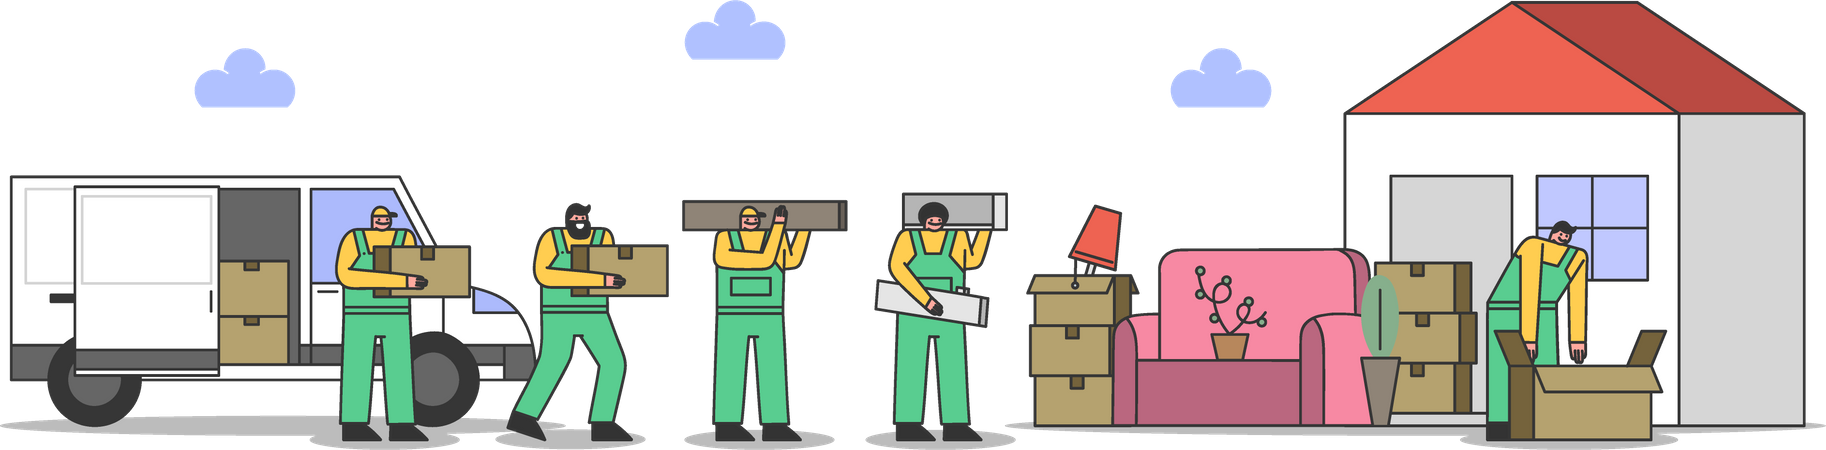 Worker carrying boxes and unloading truck Illustration